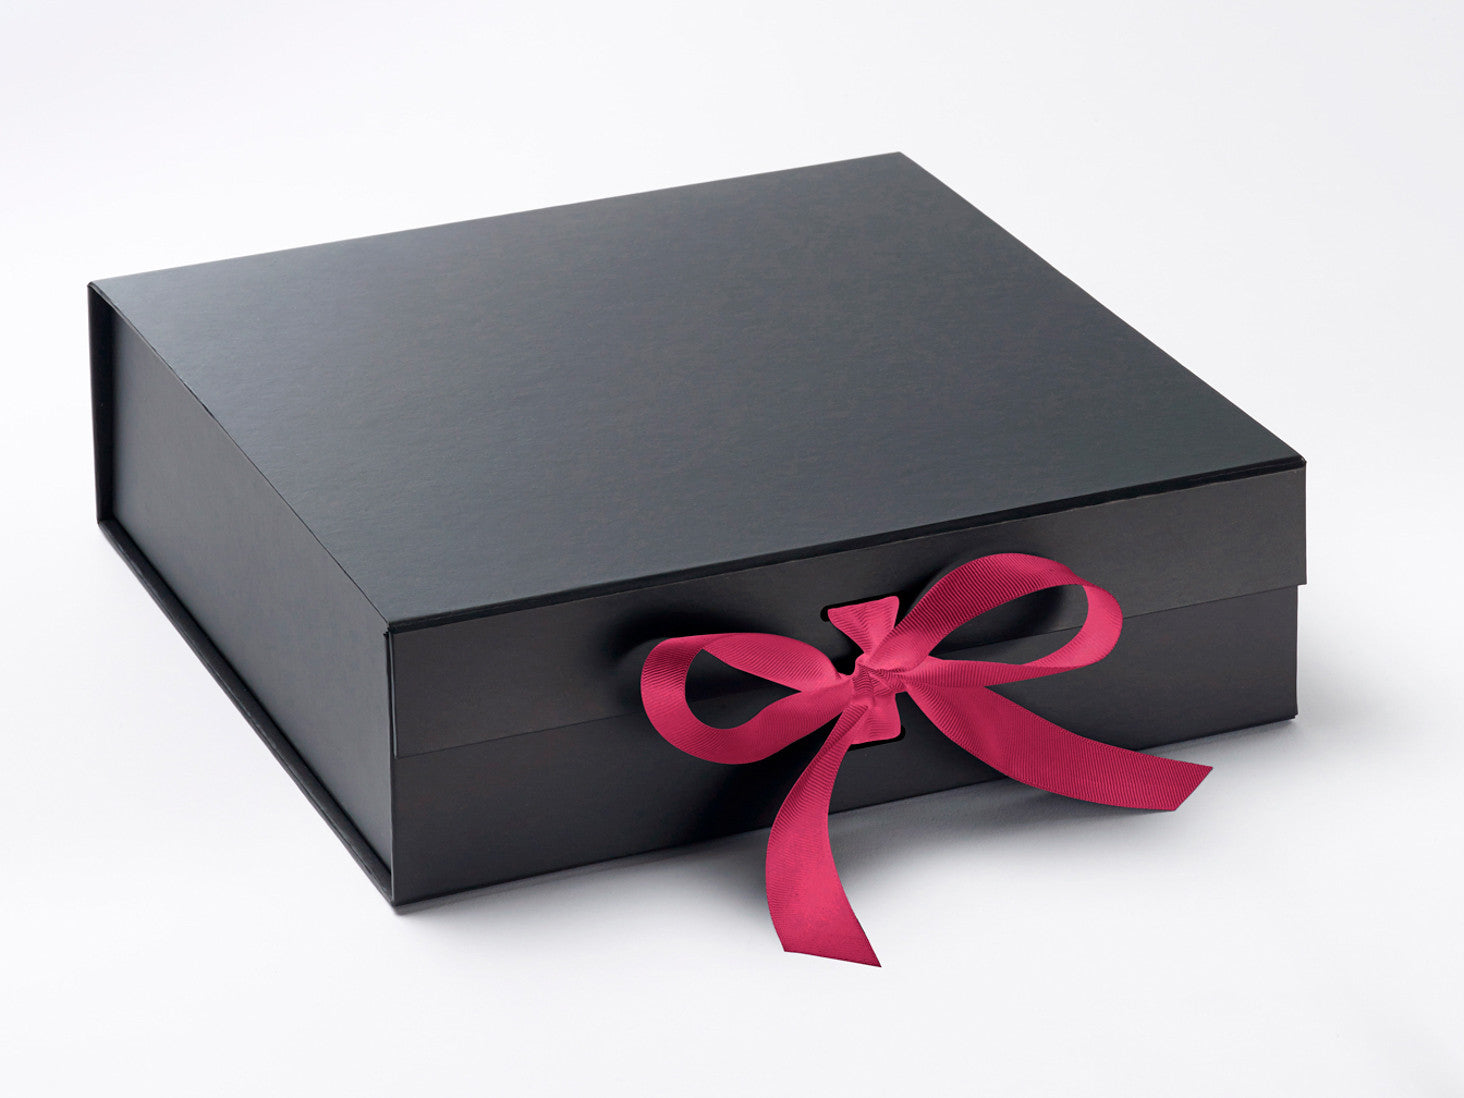 Exciting ribbon color alternatives to fit our expanding range of Slot Gift Boxes